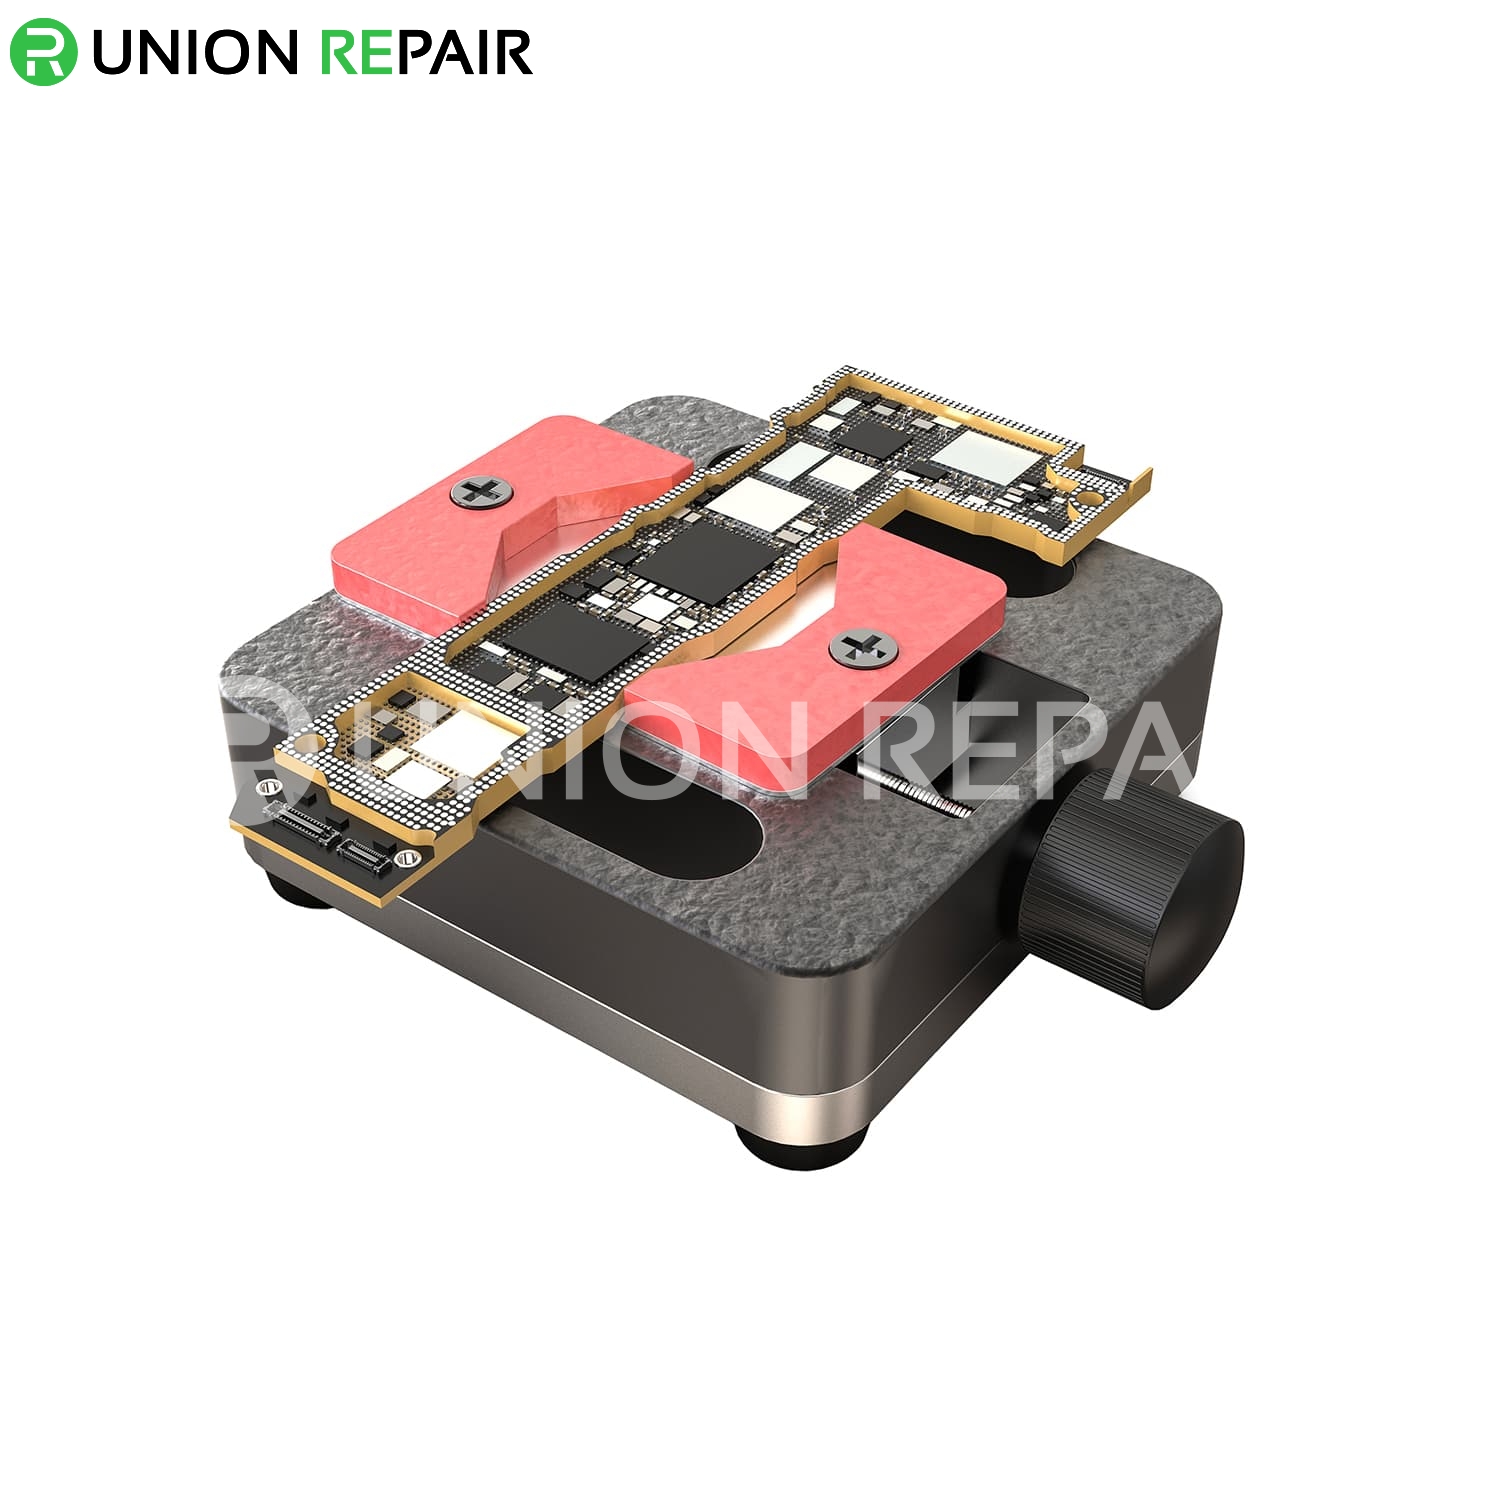 2UUL Mini Jig for Phone Board & Chip